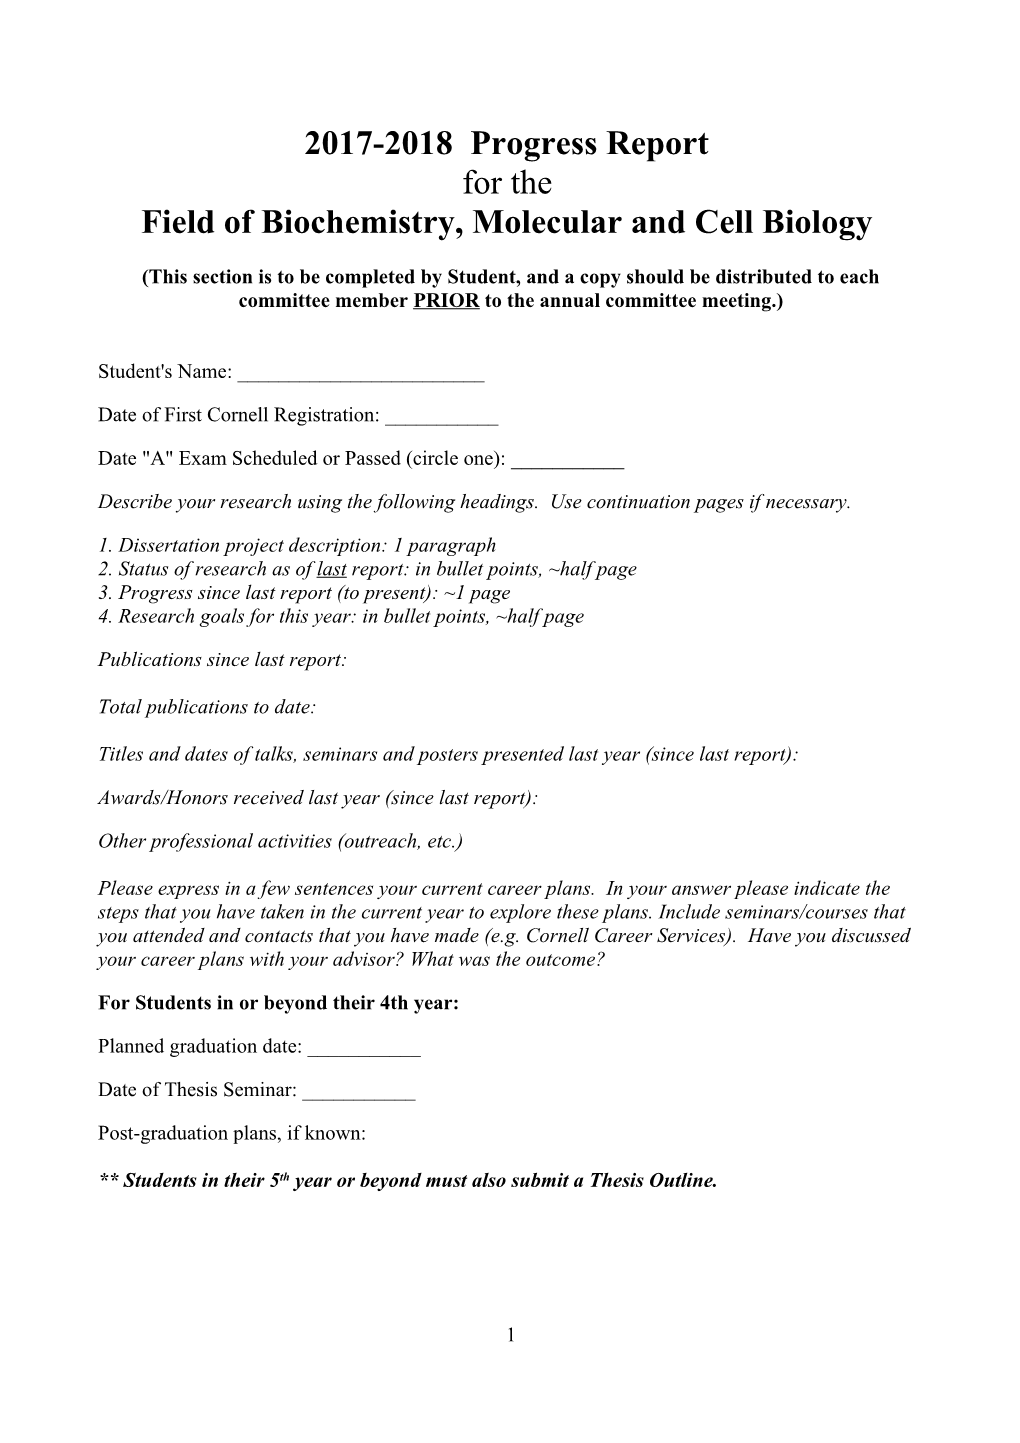 Field of Biochemistry, Molecular and Cell Biology